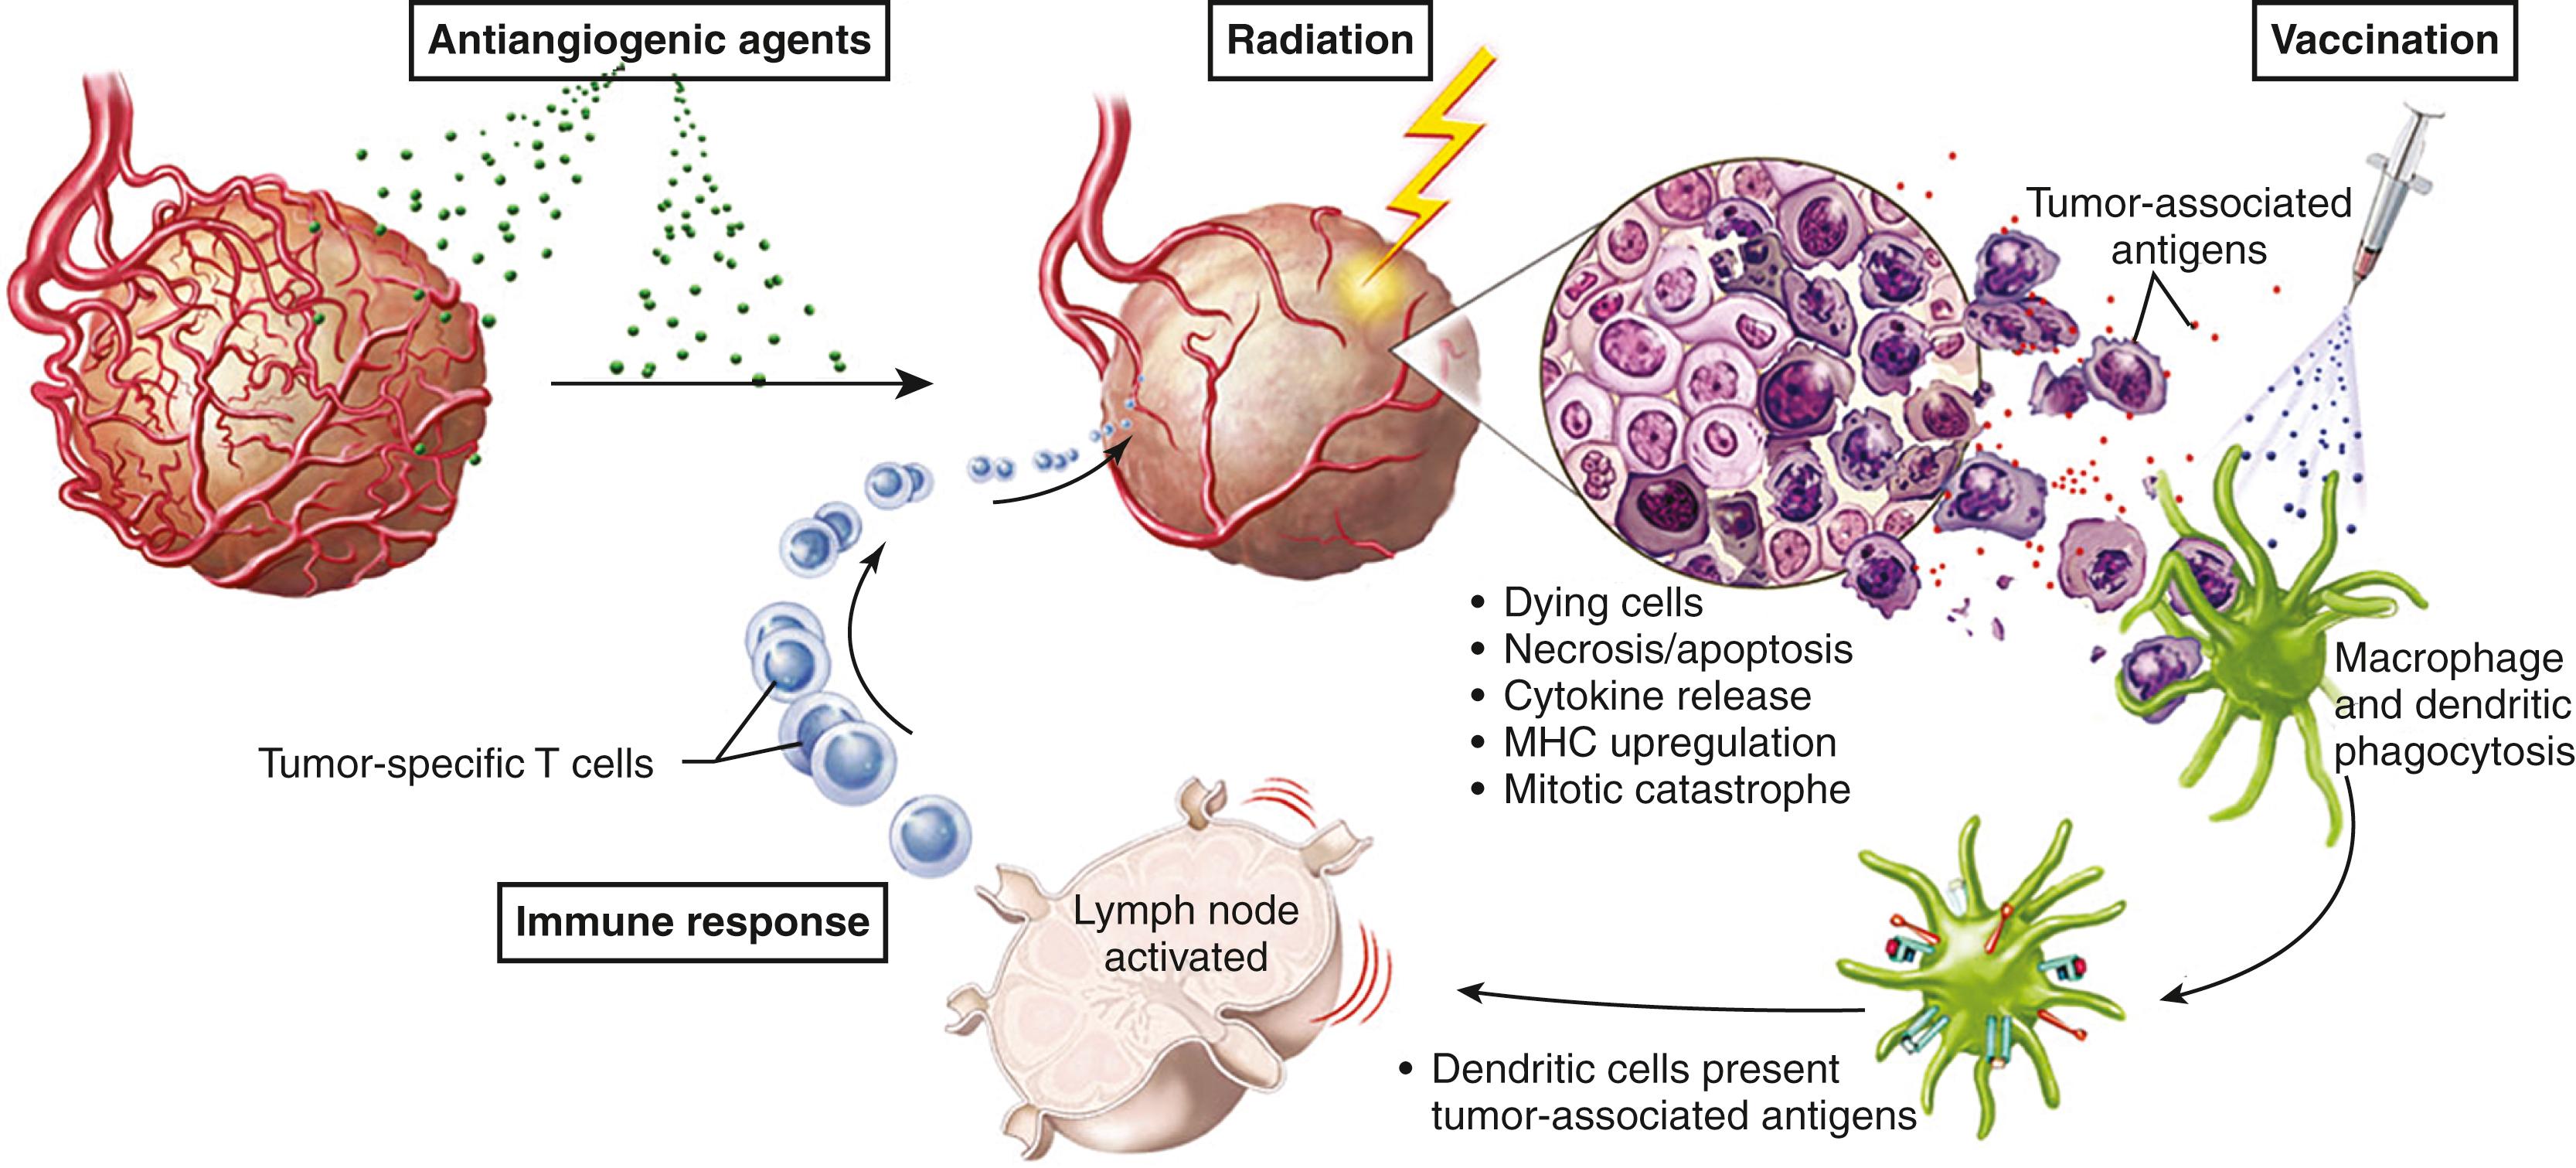 Figure 140.9, The combined use of radiation, immunotherapy, and angiogenesis inhibitors.